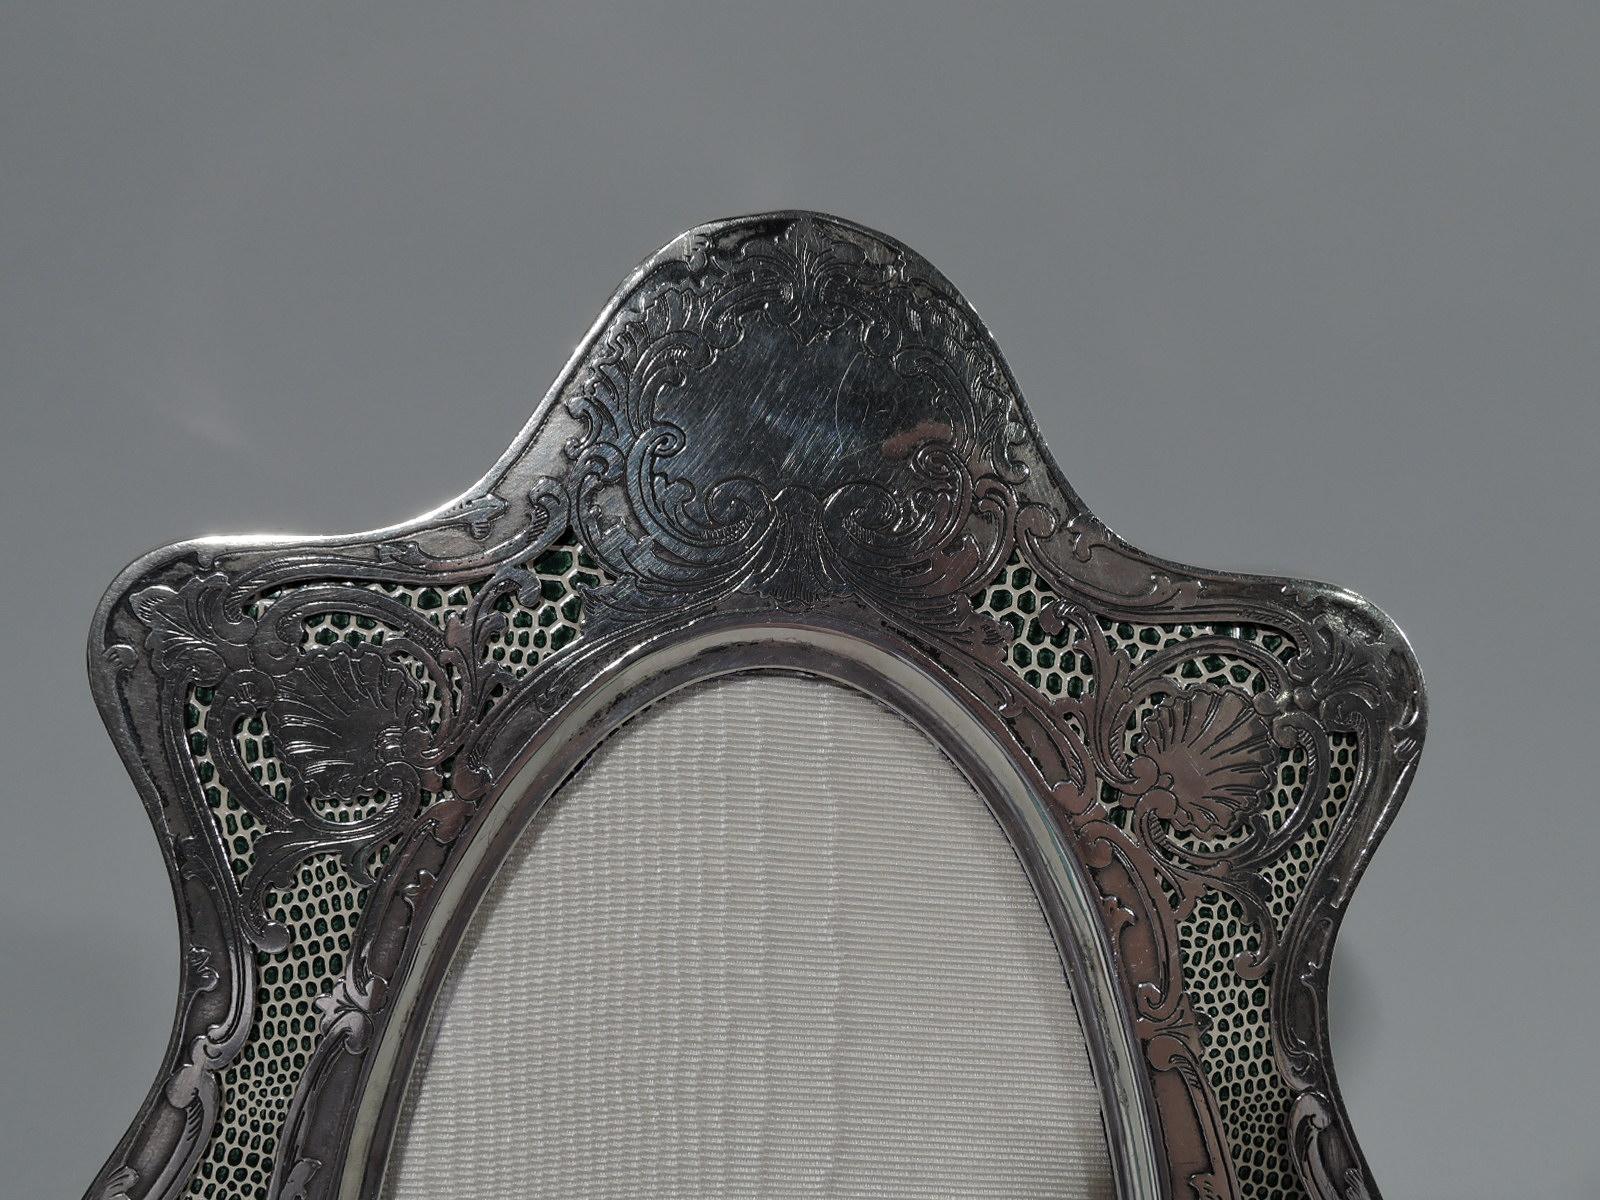 American Art Nouveau sterling silver picture frame, circa 1900. Narrow oval window in wavy-shaped surround with bracket feet. Open ornament with leaves, flowers, and shells on irregularly speckled green and white ground. Top solid with scrolled